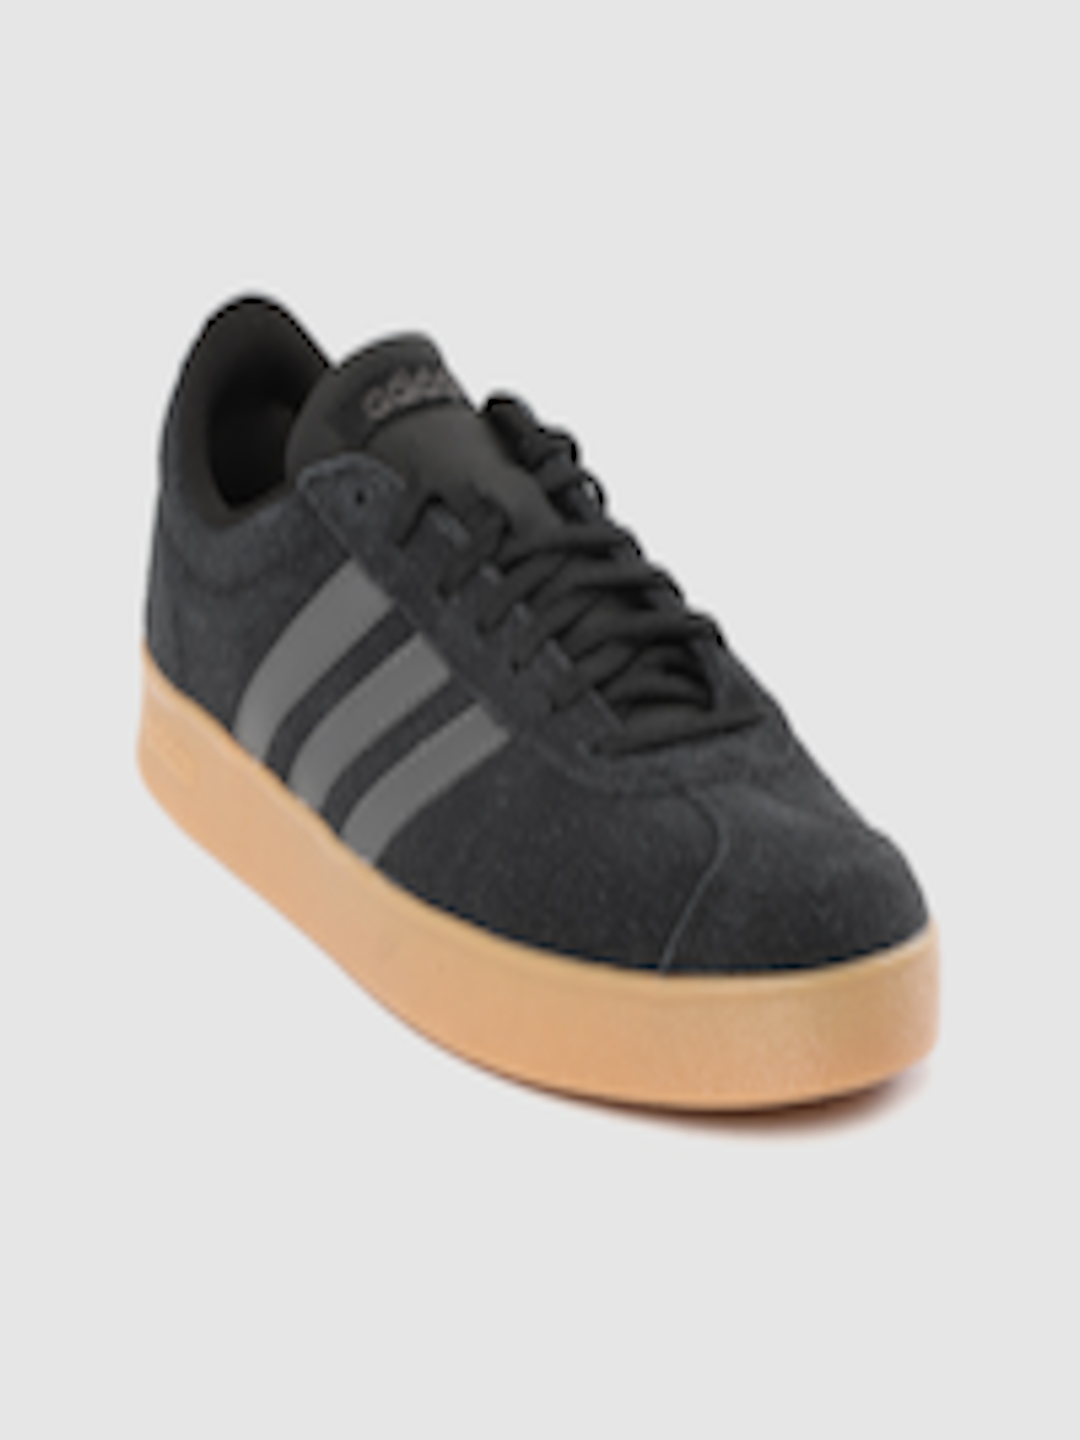 Buy ADIDAS Women Black Solid VL Court 2.0 Leather Skateboarding Shoes